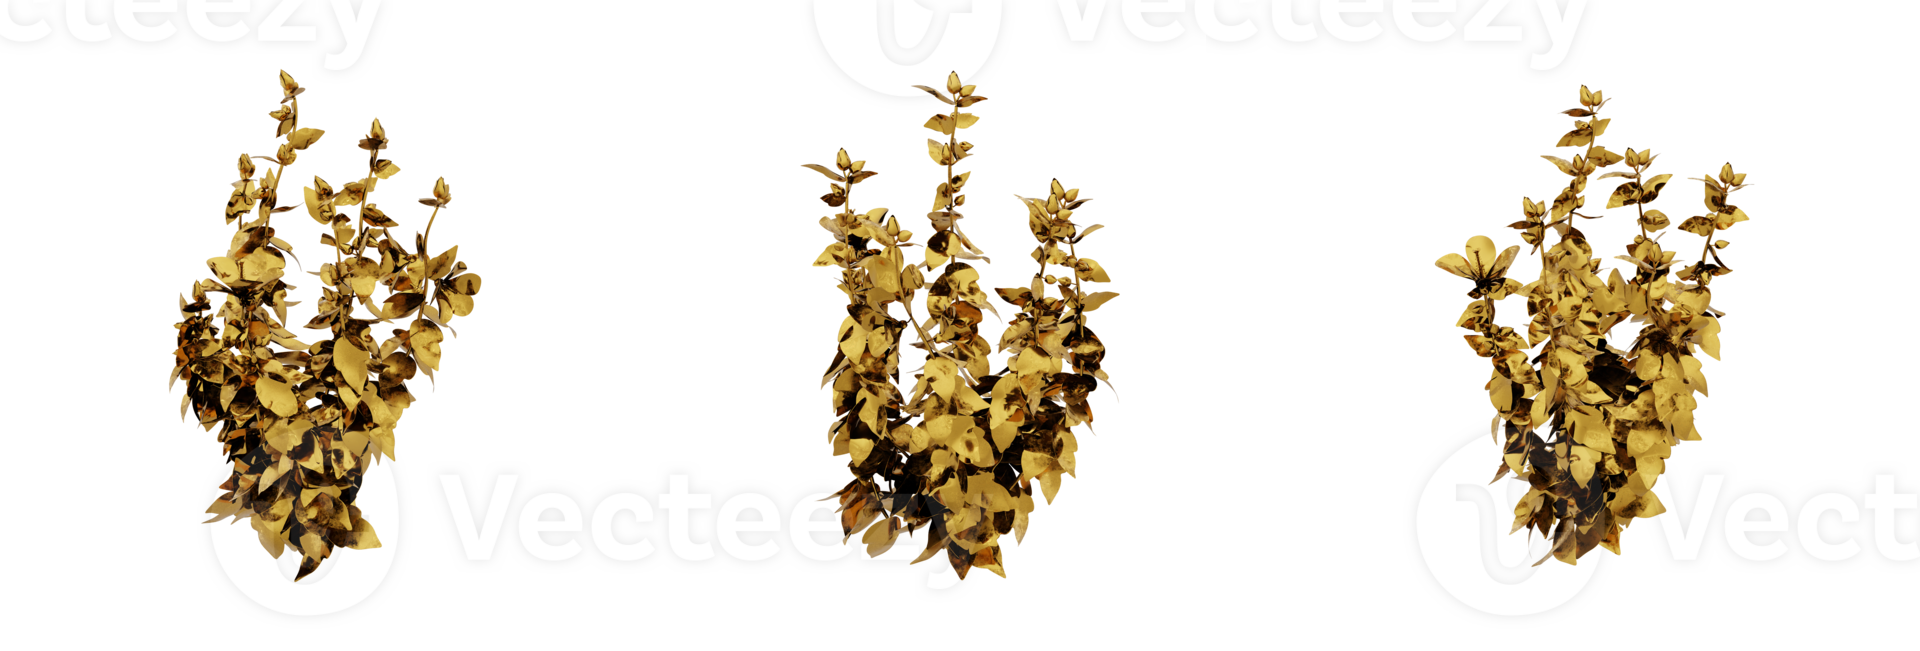 A stunning 3D rendering of a golden plant that will add richness and elegance to any design. This gold plant has a metallic finish and natural-looking leaves png